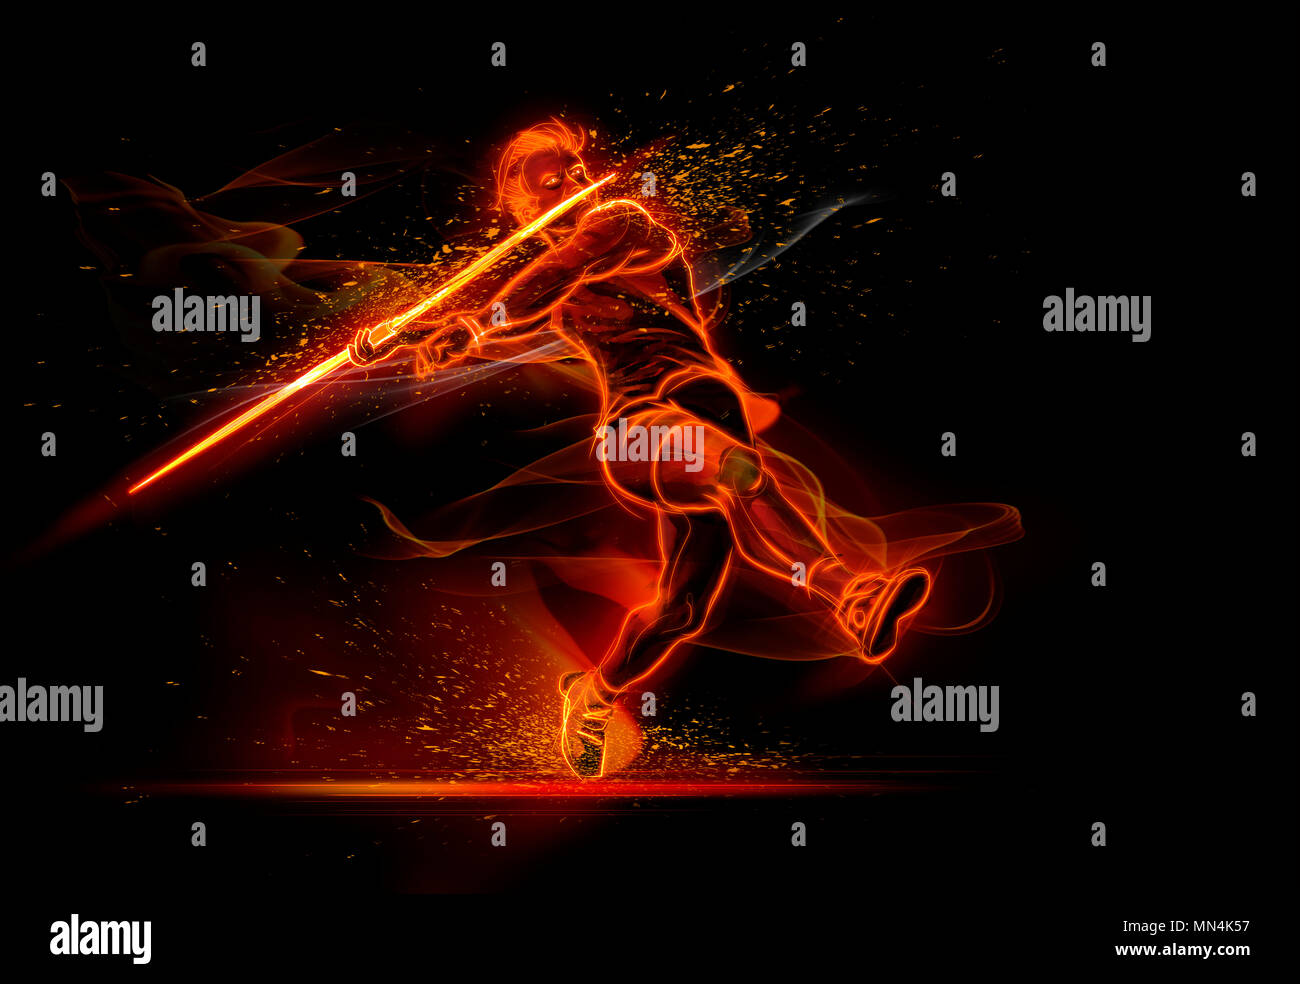 Computer generated image track and field athlete throwing javelin Stock Photo